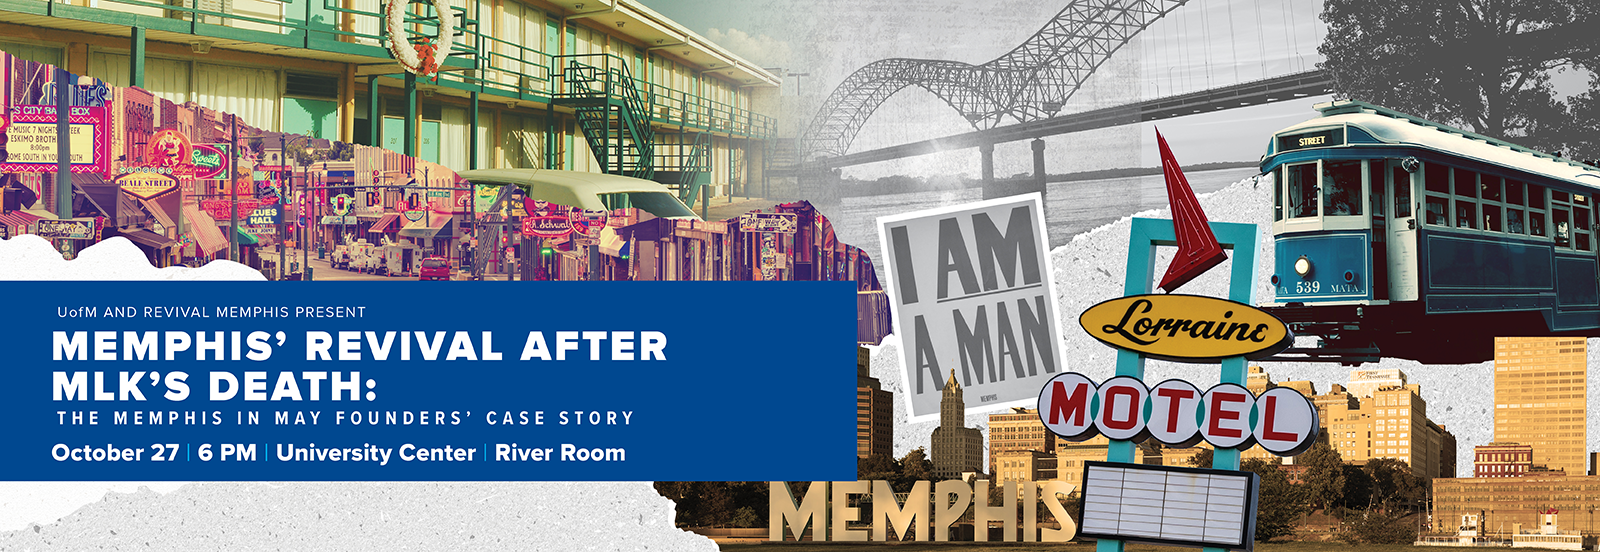 UofM and Revival Memphis present “Memphis’ Revival After the MLK Death: The Memphis in May Founders story”  Thursday, October 27, 2022   |   6:00 – 8:30 pm | In the University Center River Room